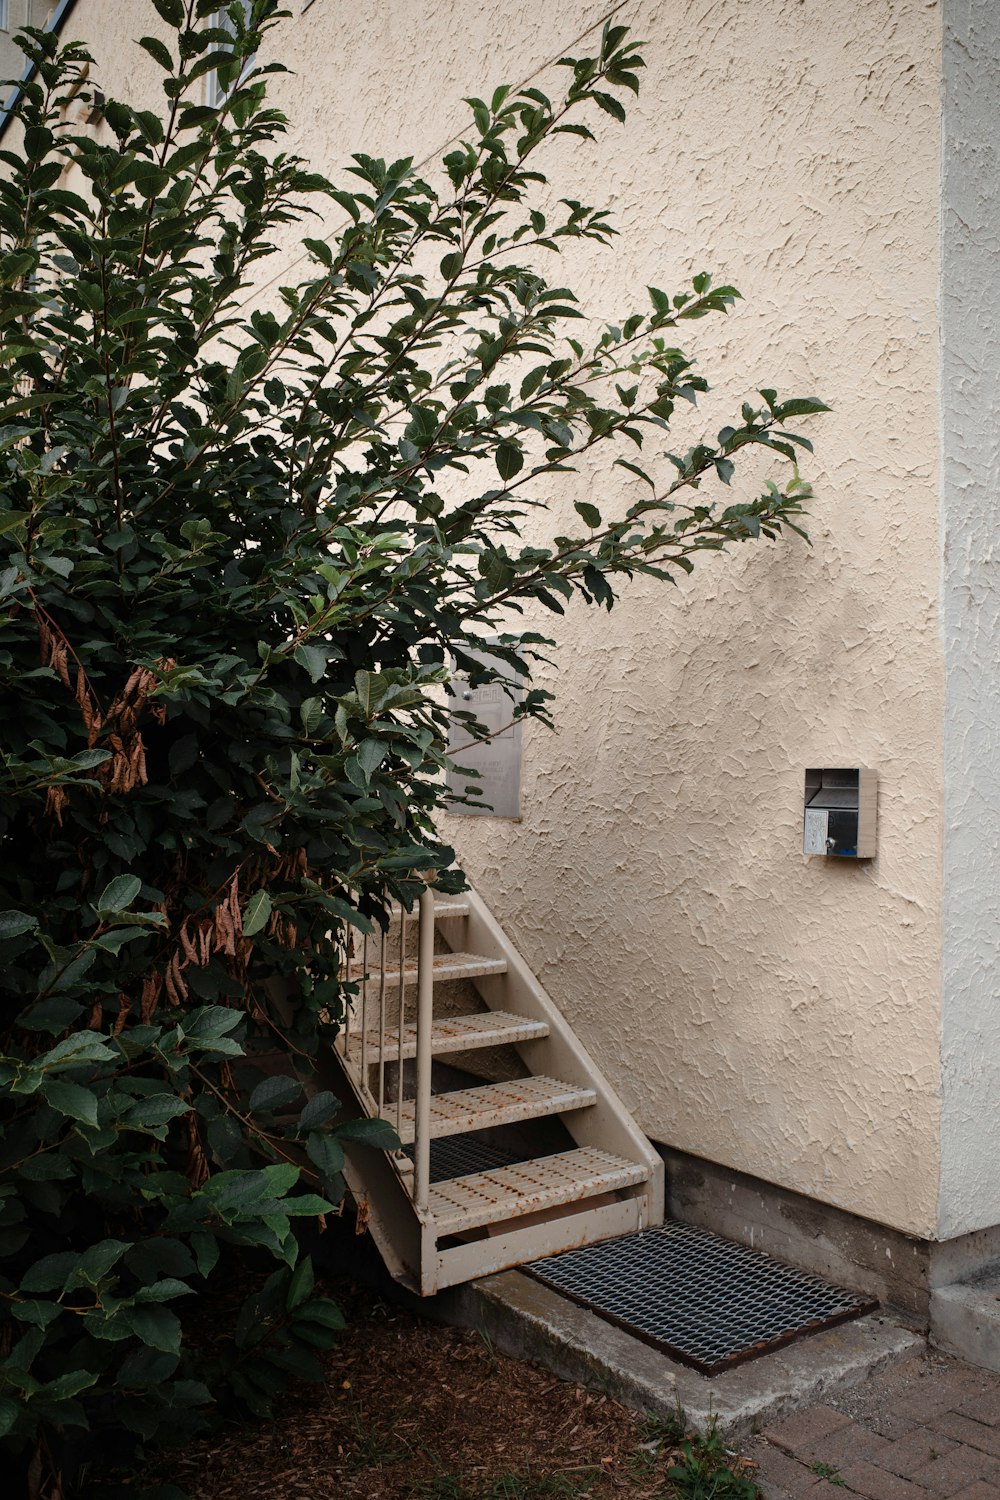 a small wooden ladder next to a wall with a planter